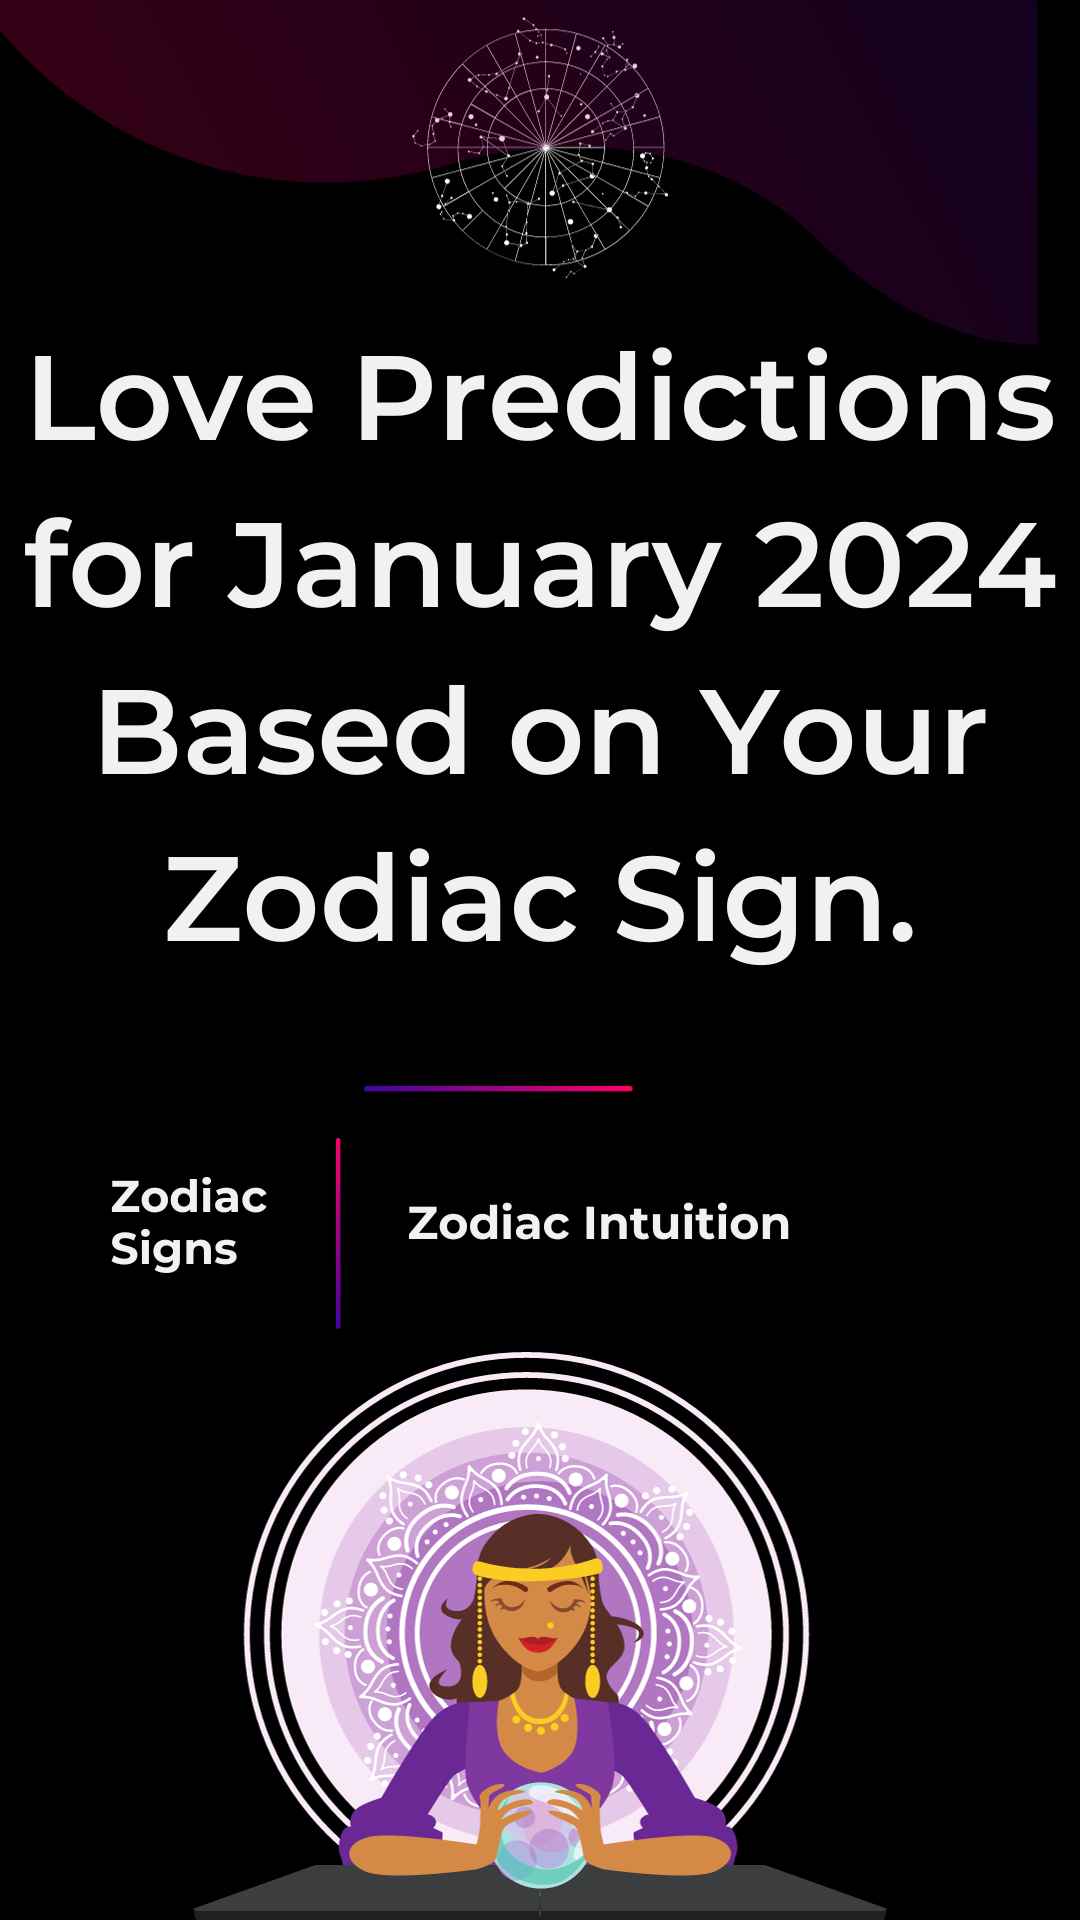 Love Predictions for January 2024 Based on Your Zodiac Sign.